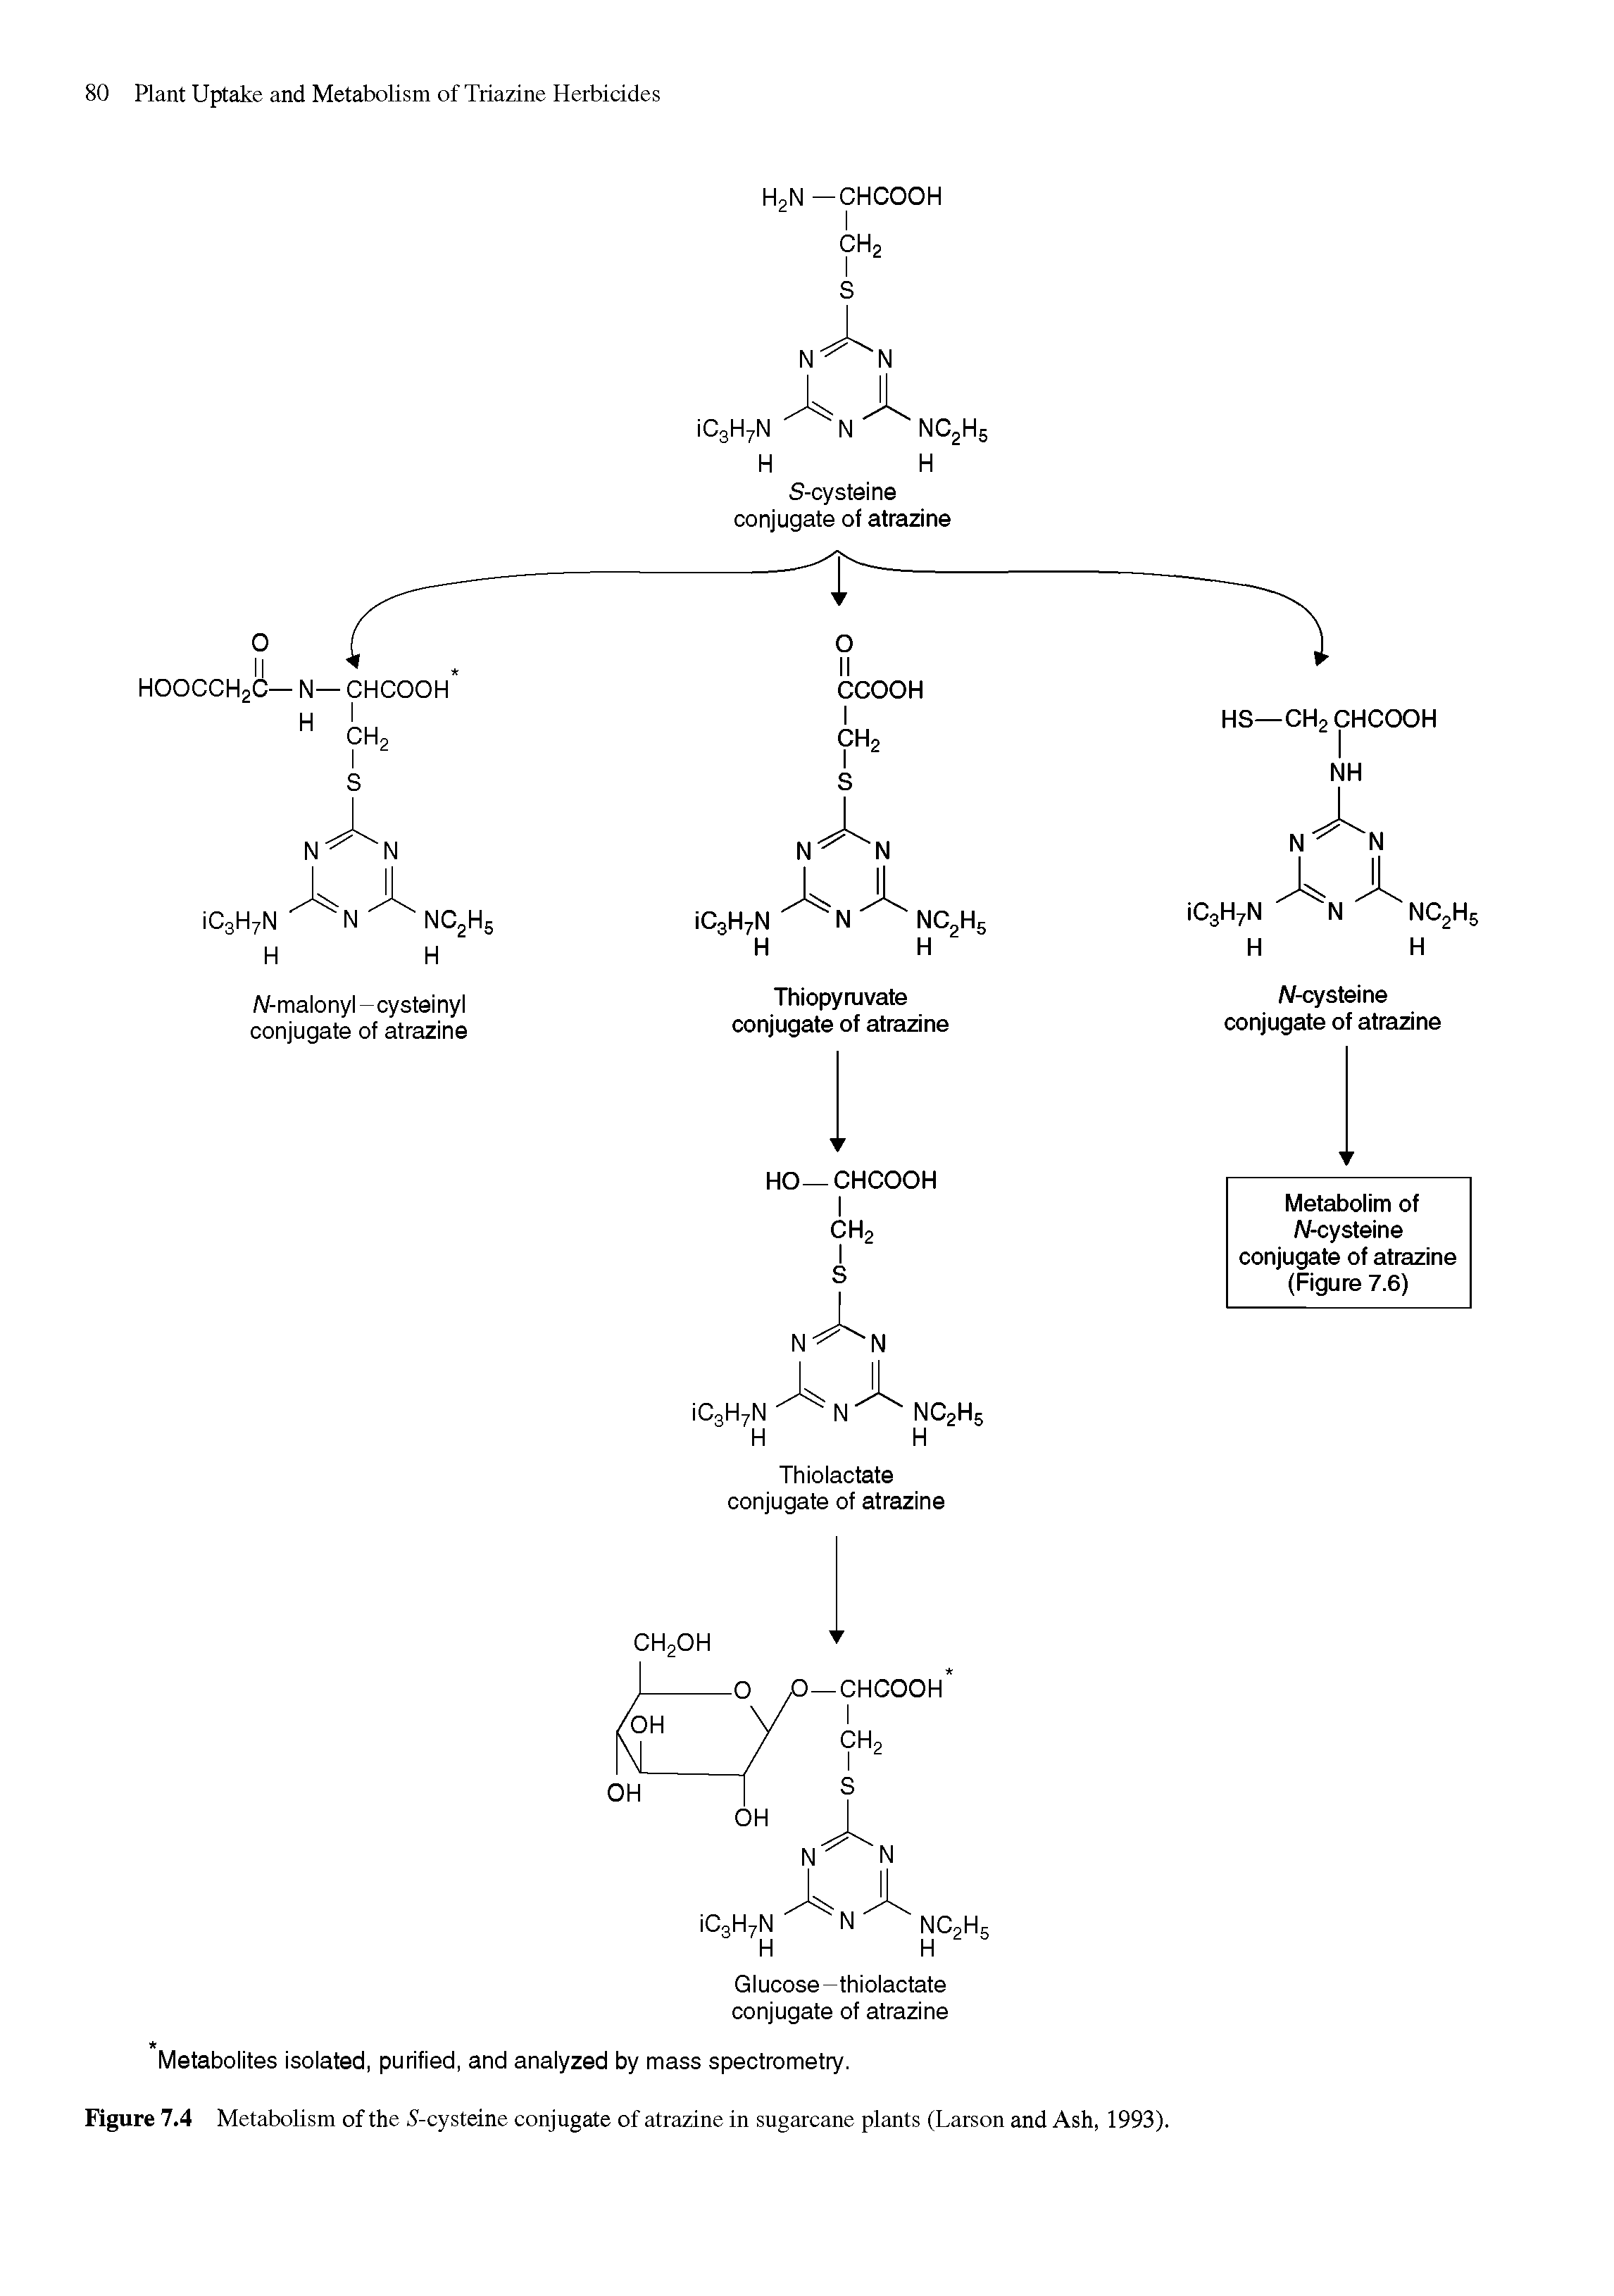 Figure 7.4 Metabolism of the 5-cysteine conjugate of atrazine in sugarcane plants (Larson and Ash, 1993).